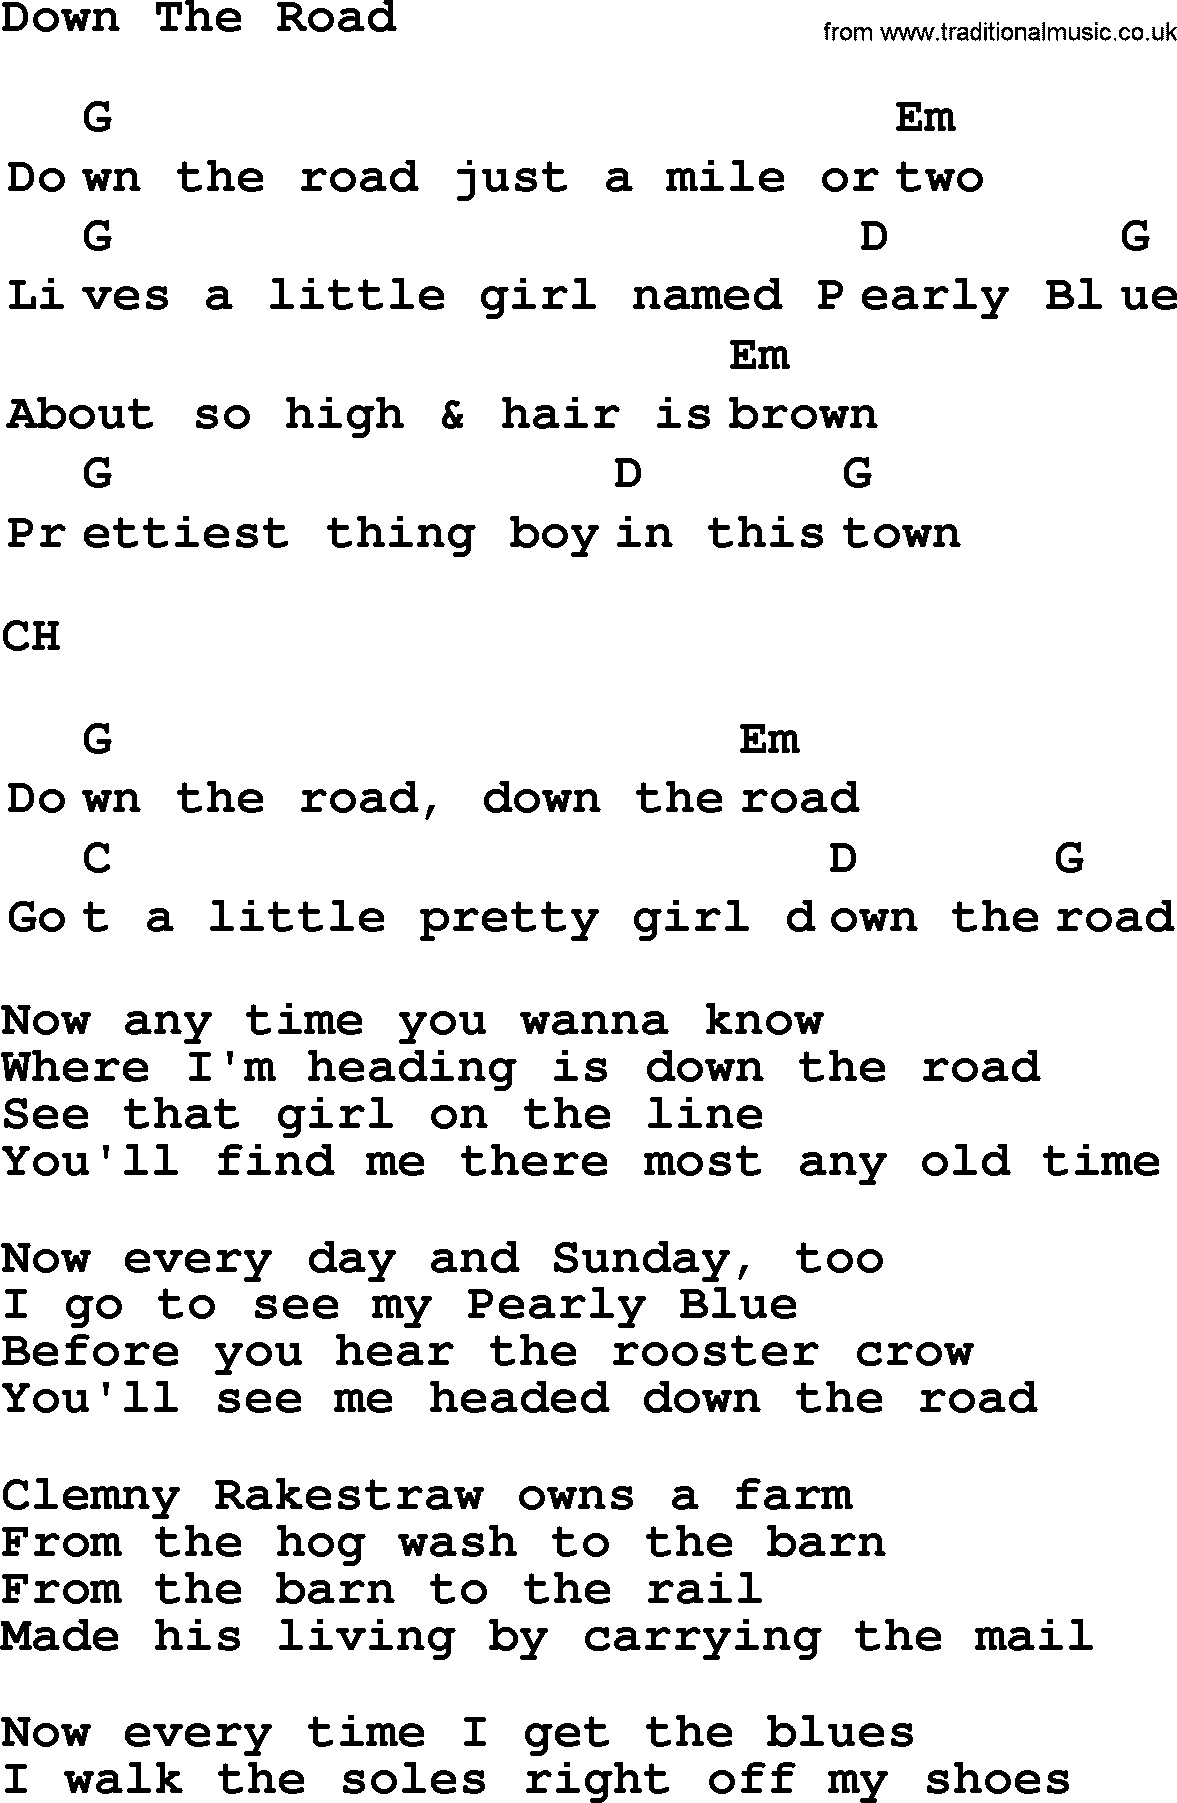 Top 1000 Most Popular Folk and Old-time Songs: Down The Road, lyrics and chords